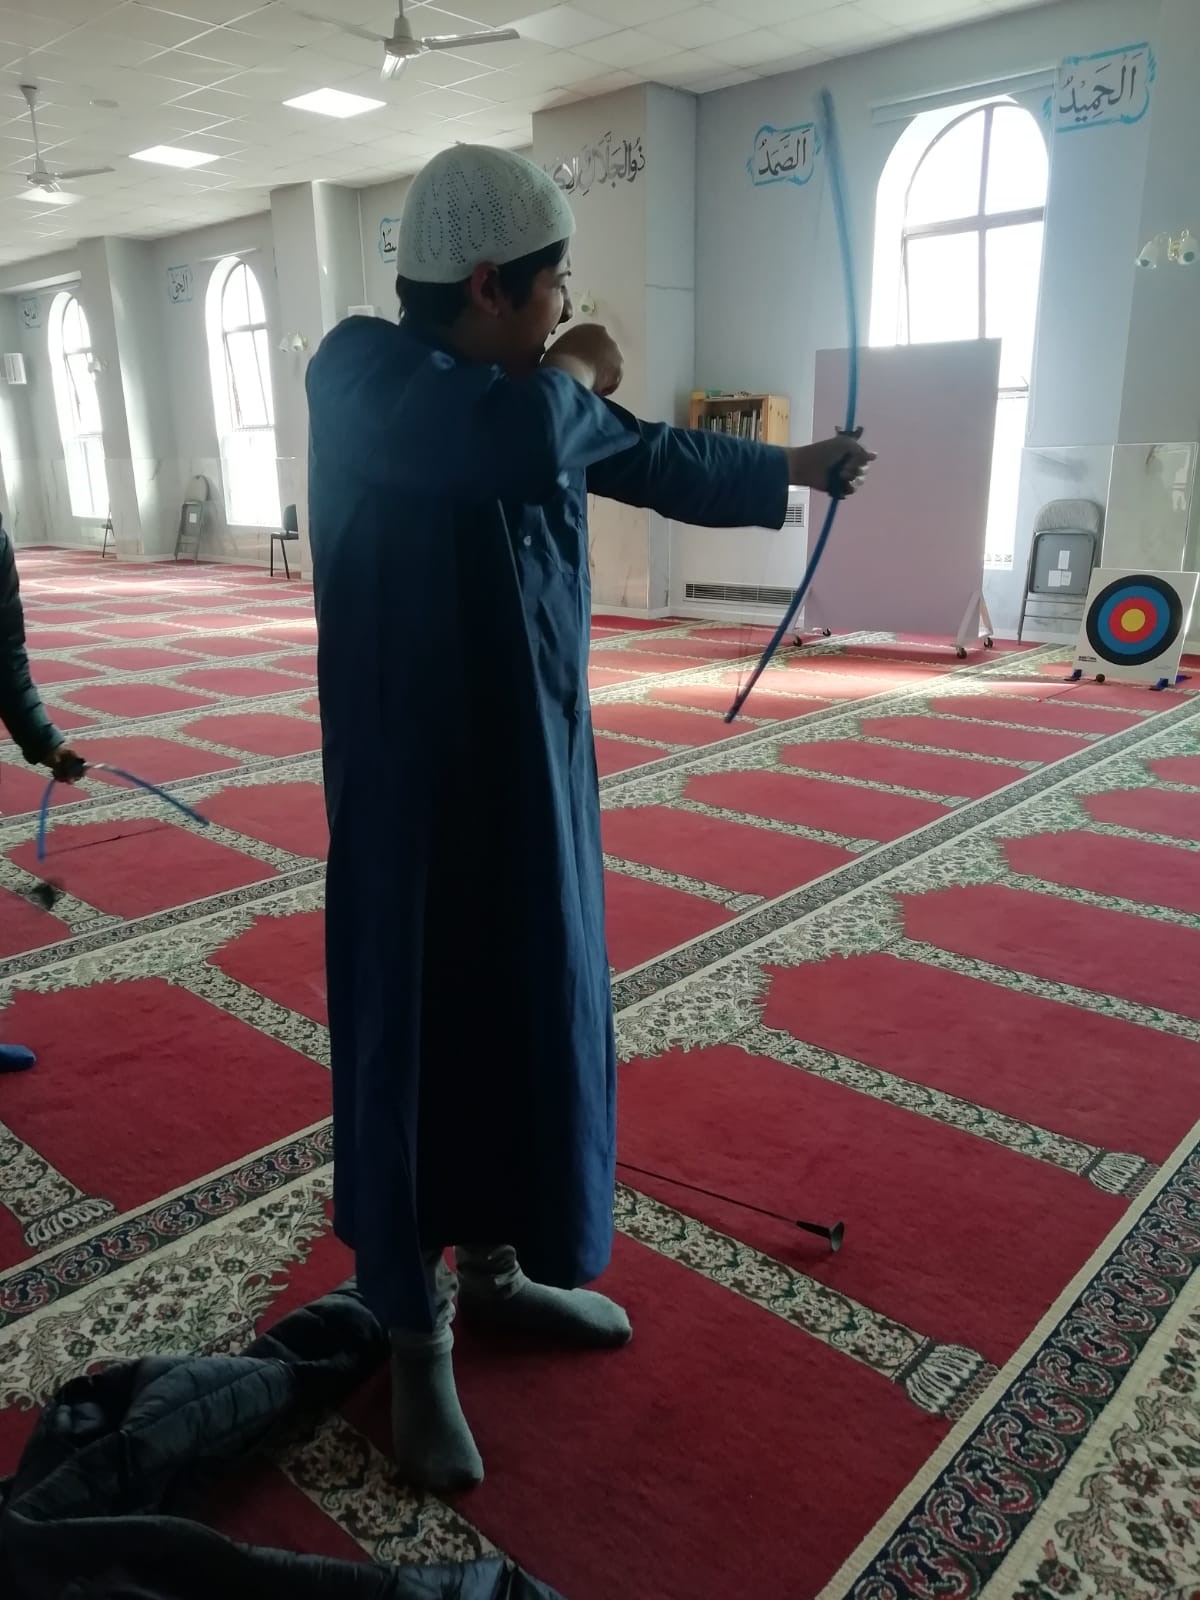 Boy doing soft archery in the mosque